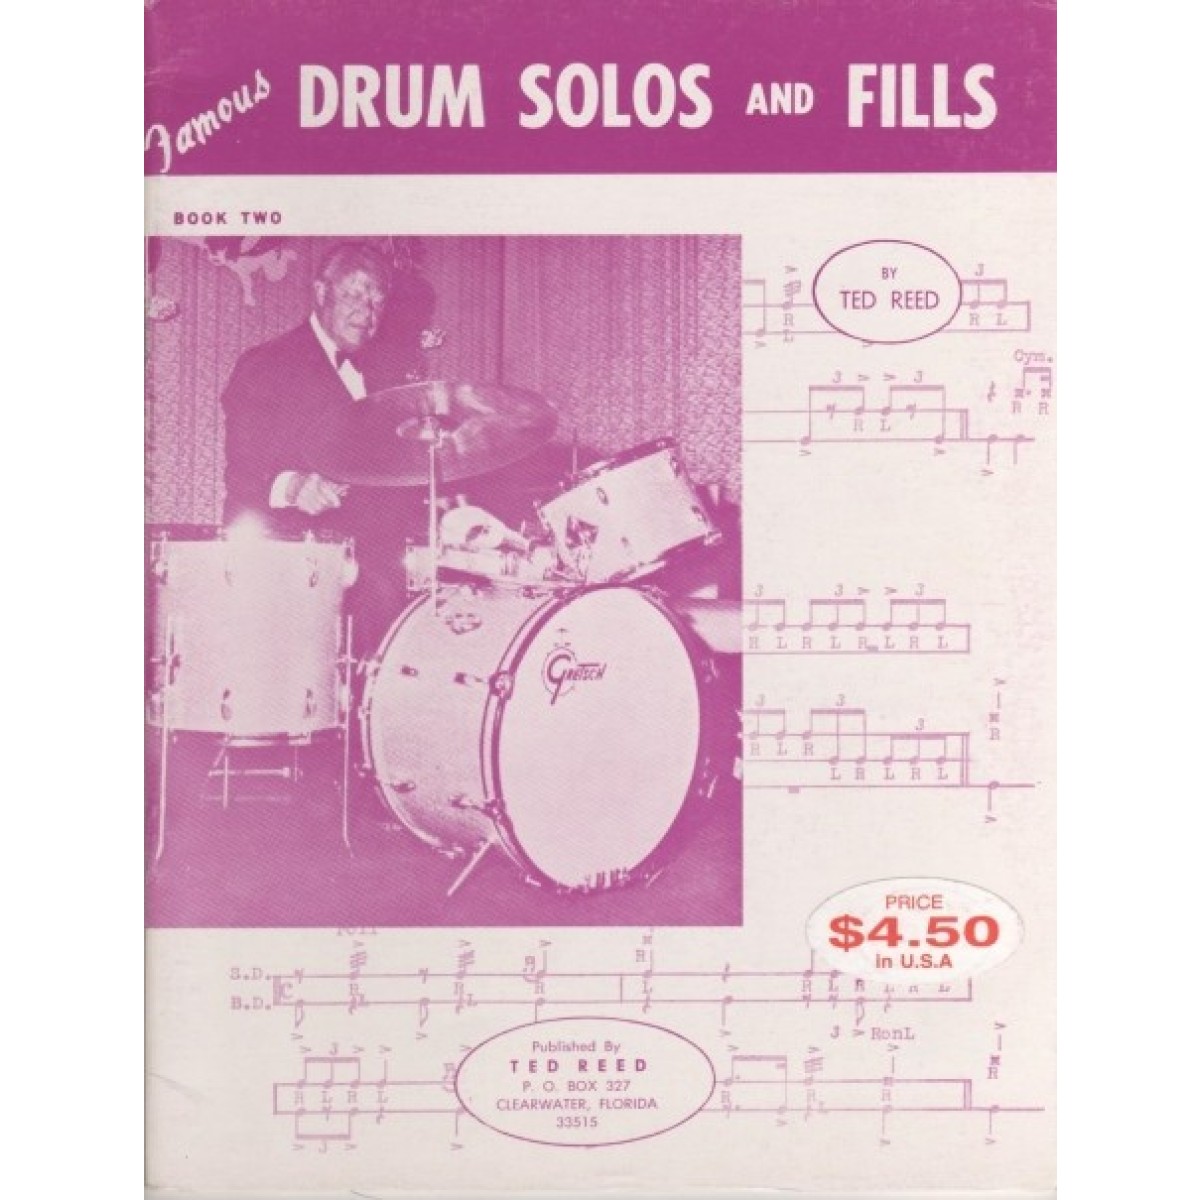 Drum Solos and Fills book 2